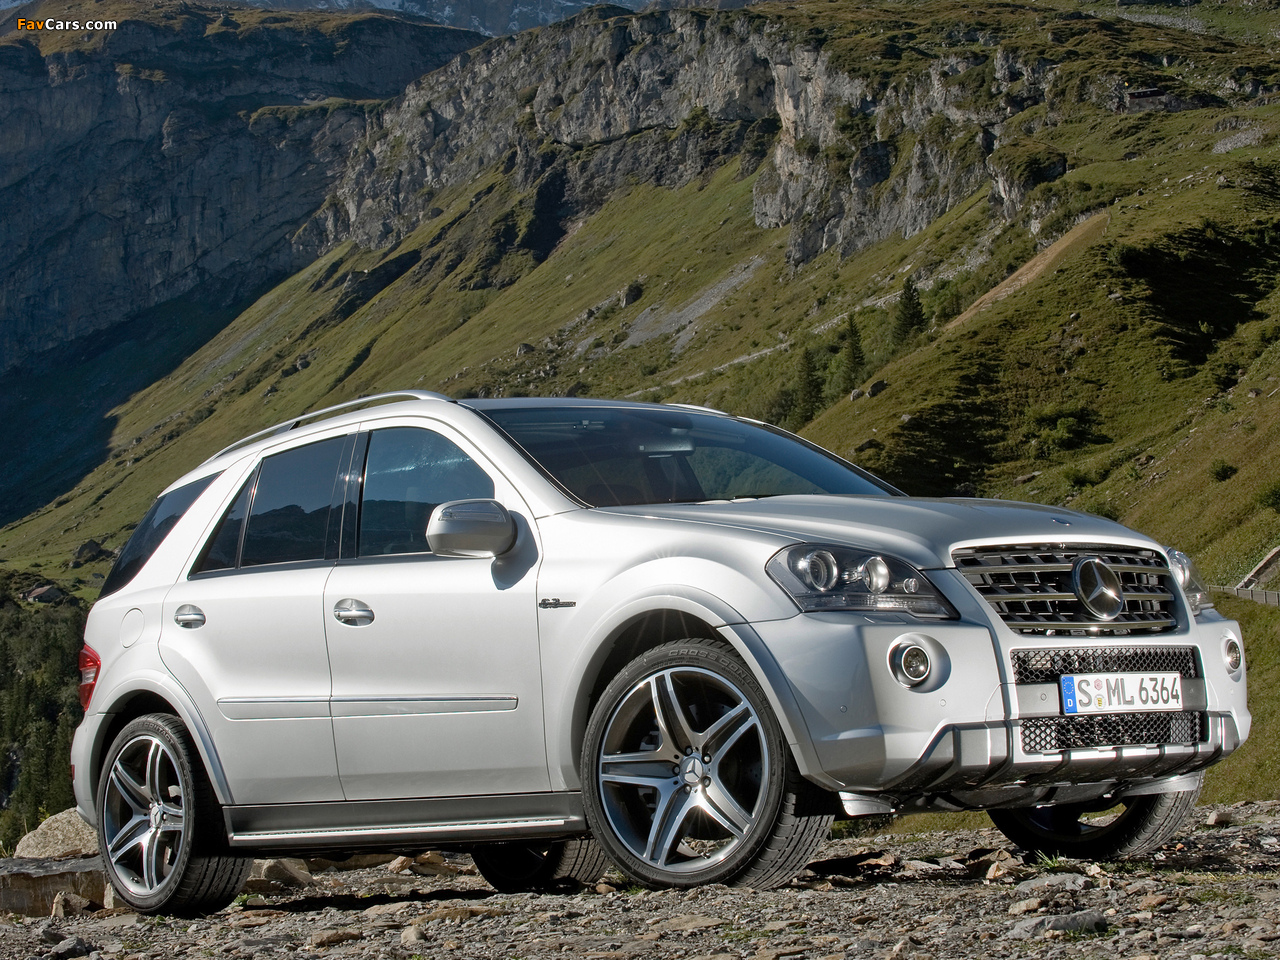 Mercedes-Benz ML 63 AMG 10th Anniversary (W164) 2009 pictures (1280 x 960)